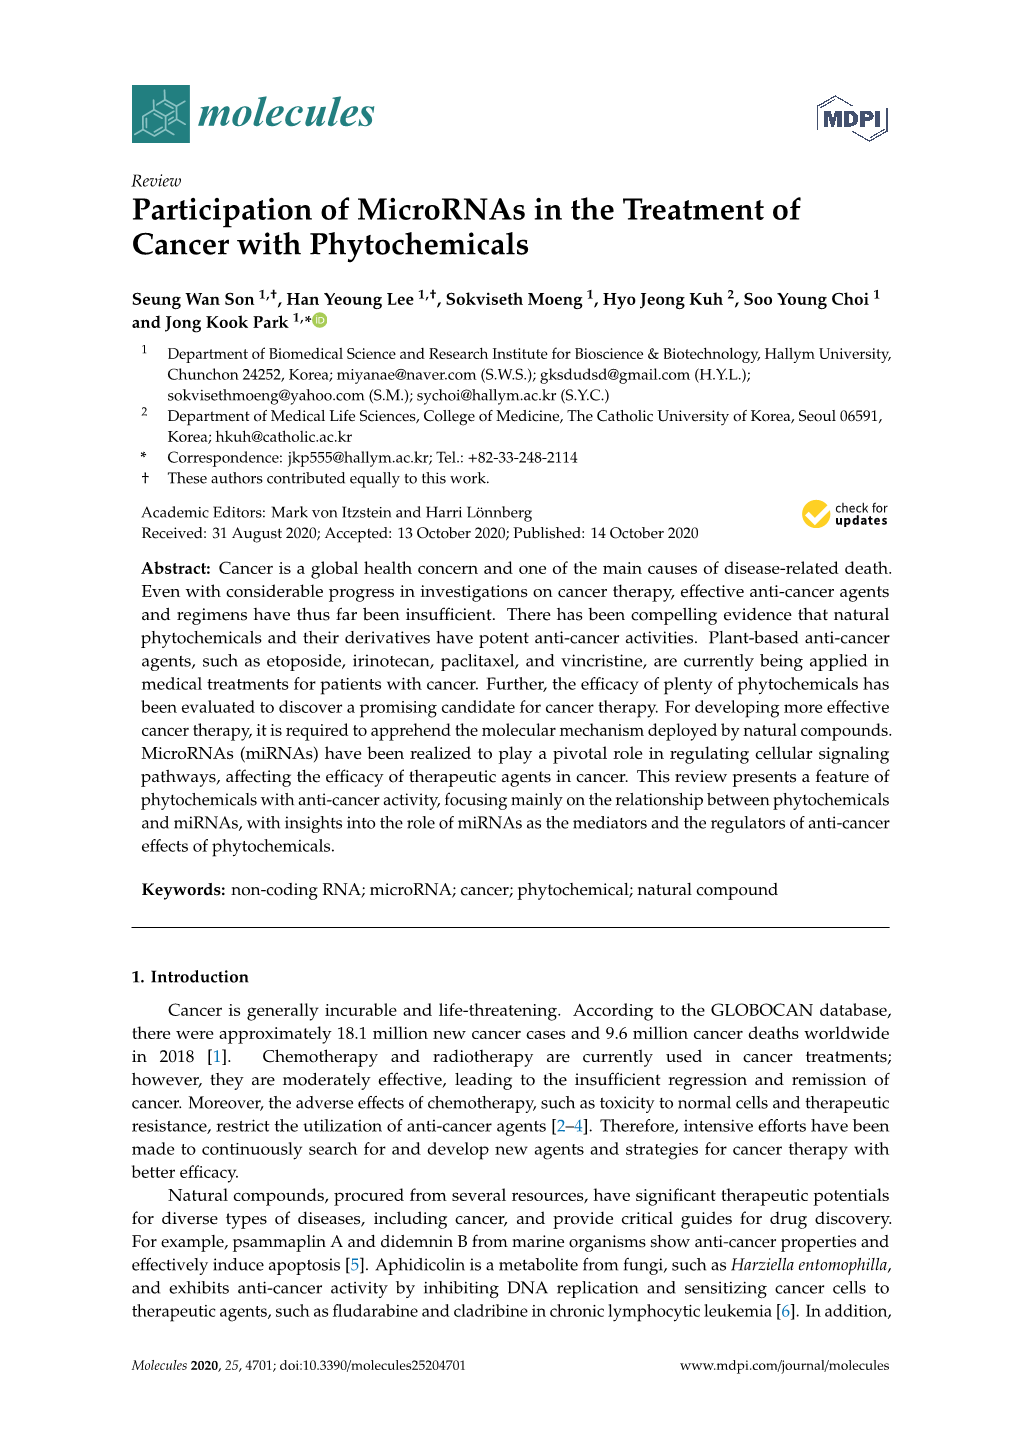 Participation of Micrornas in the Treatment of Cancer with Phytochemicals